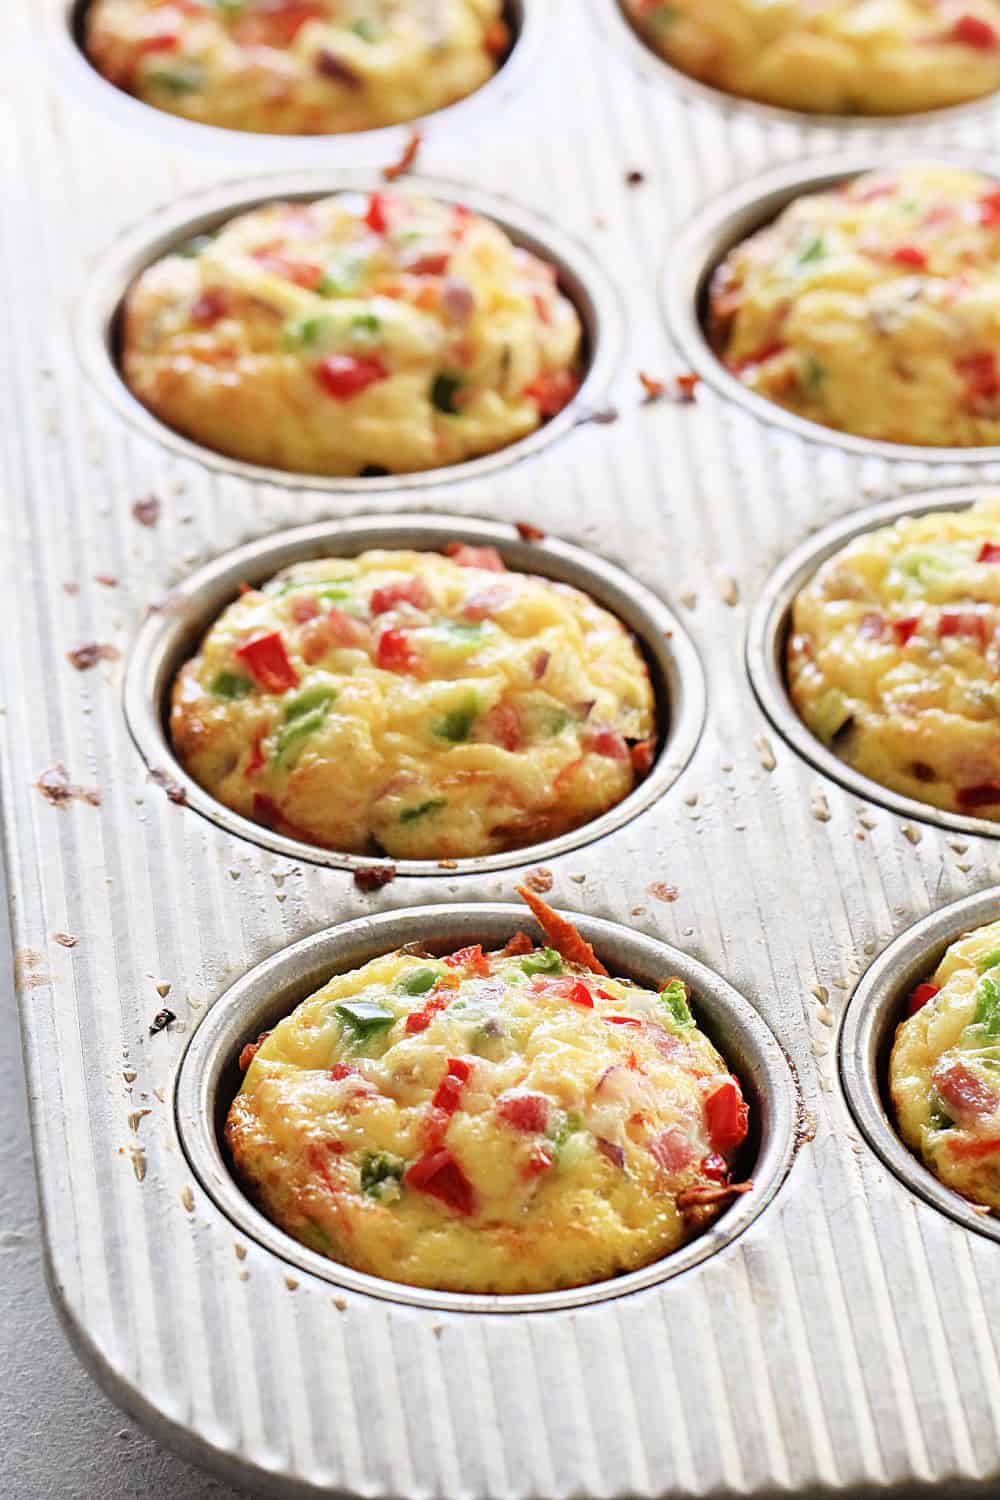 https://www.sixsistersstuff.com/wp-content/uploads/2011/07/Hashbrown-Egg-White-Nests-in-Muffin-Tin-on-SixSistersStuff-.jpg